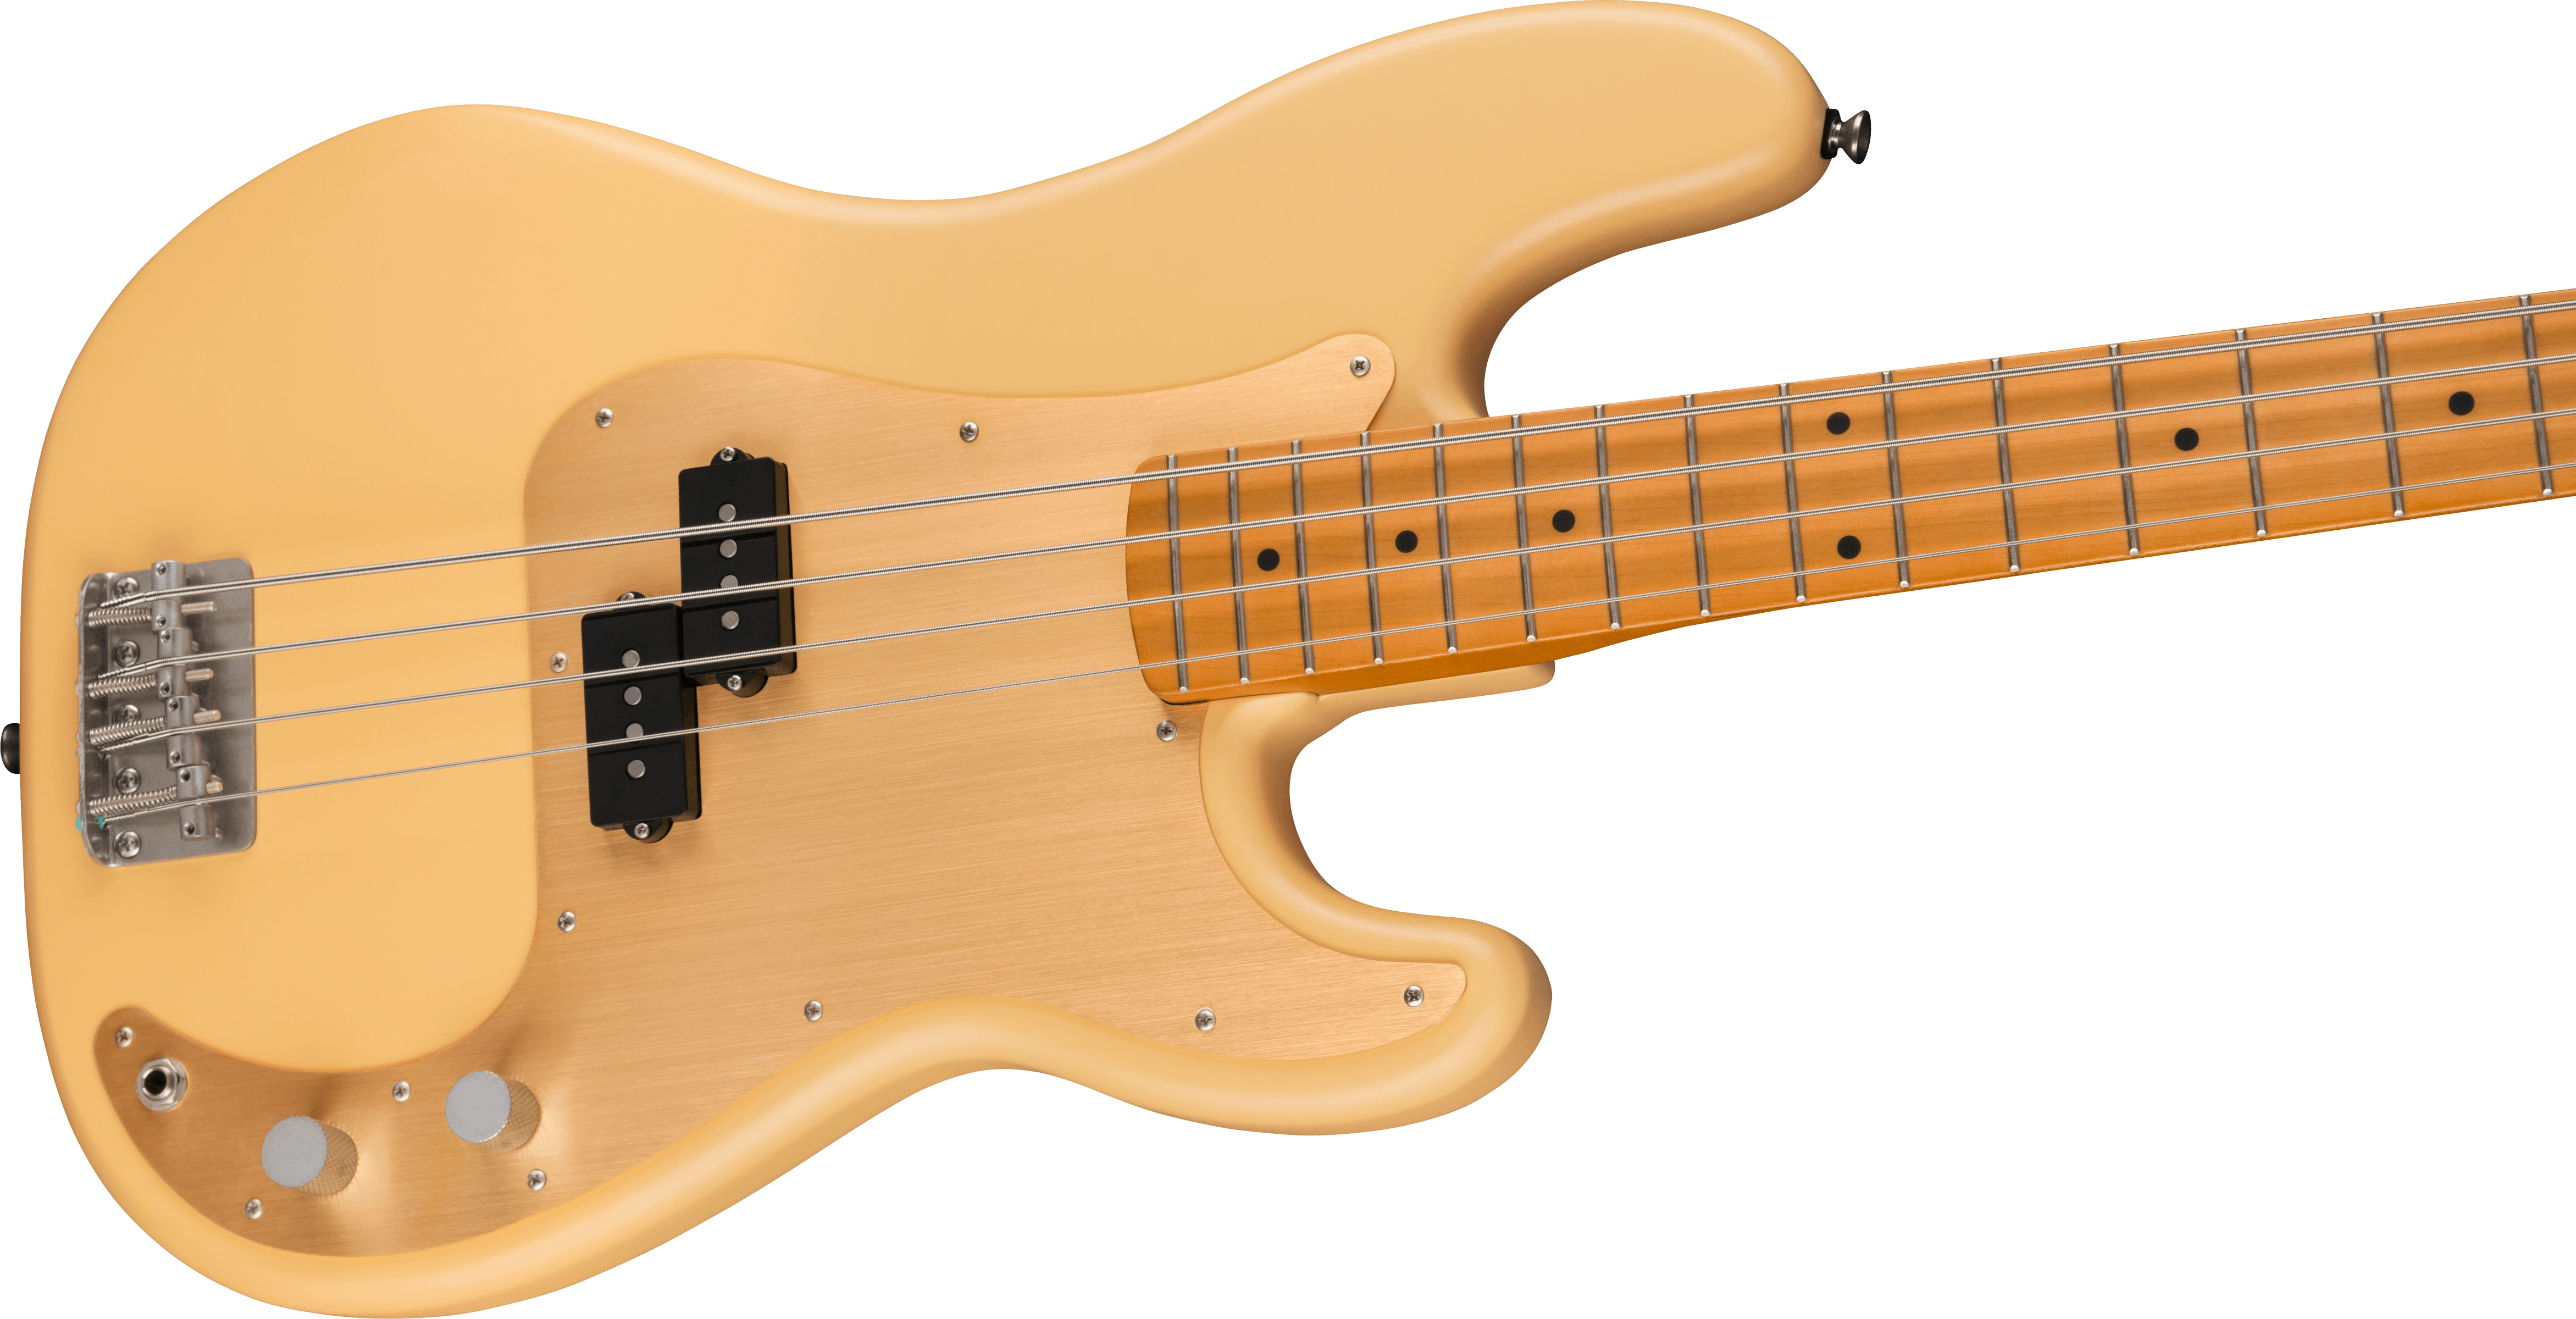 Squier Precision Bass 40th Anniversary Gold Edition Mn - Satin Vintage Blonde - Solidbody E-bass - Variation 3